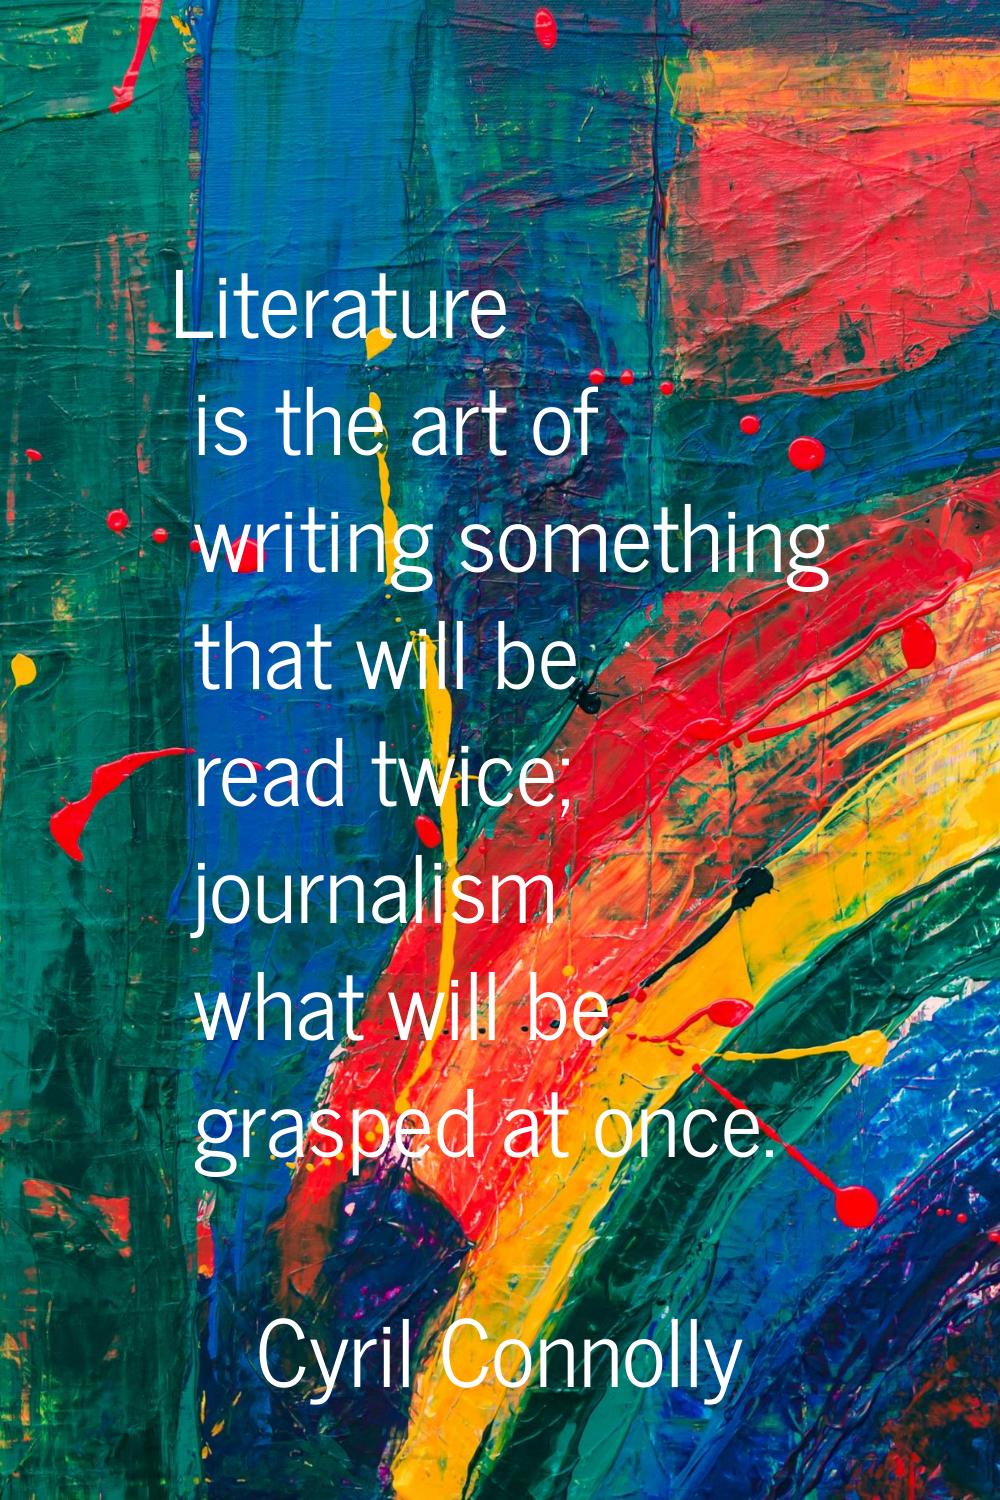 Literature is the art of writing something that will be read twice; journalism what will be grasped